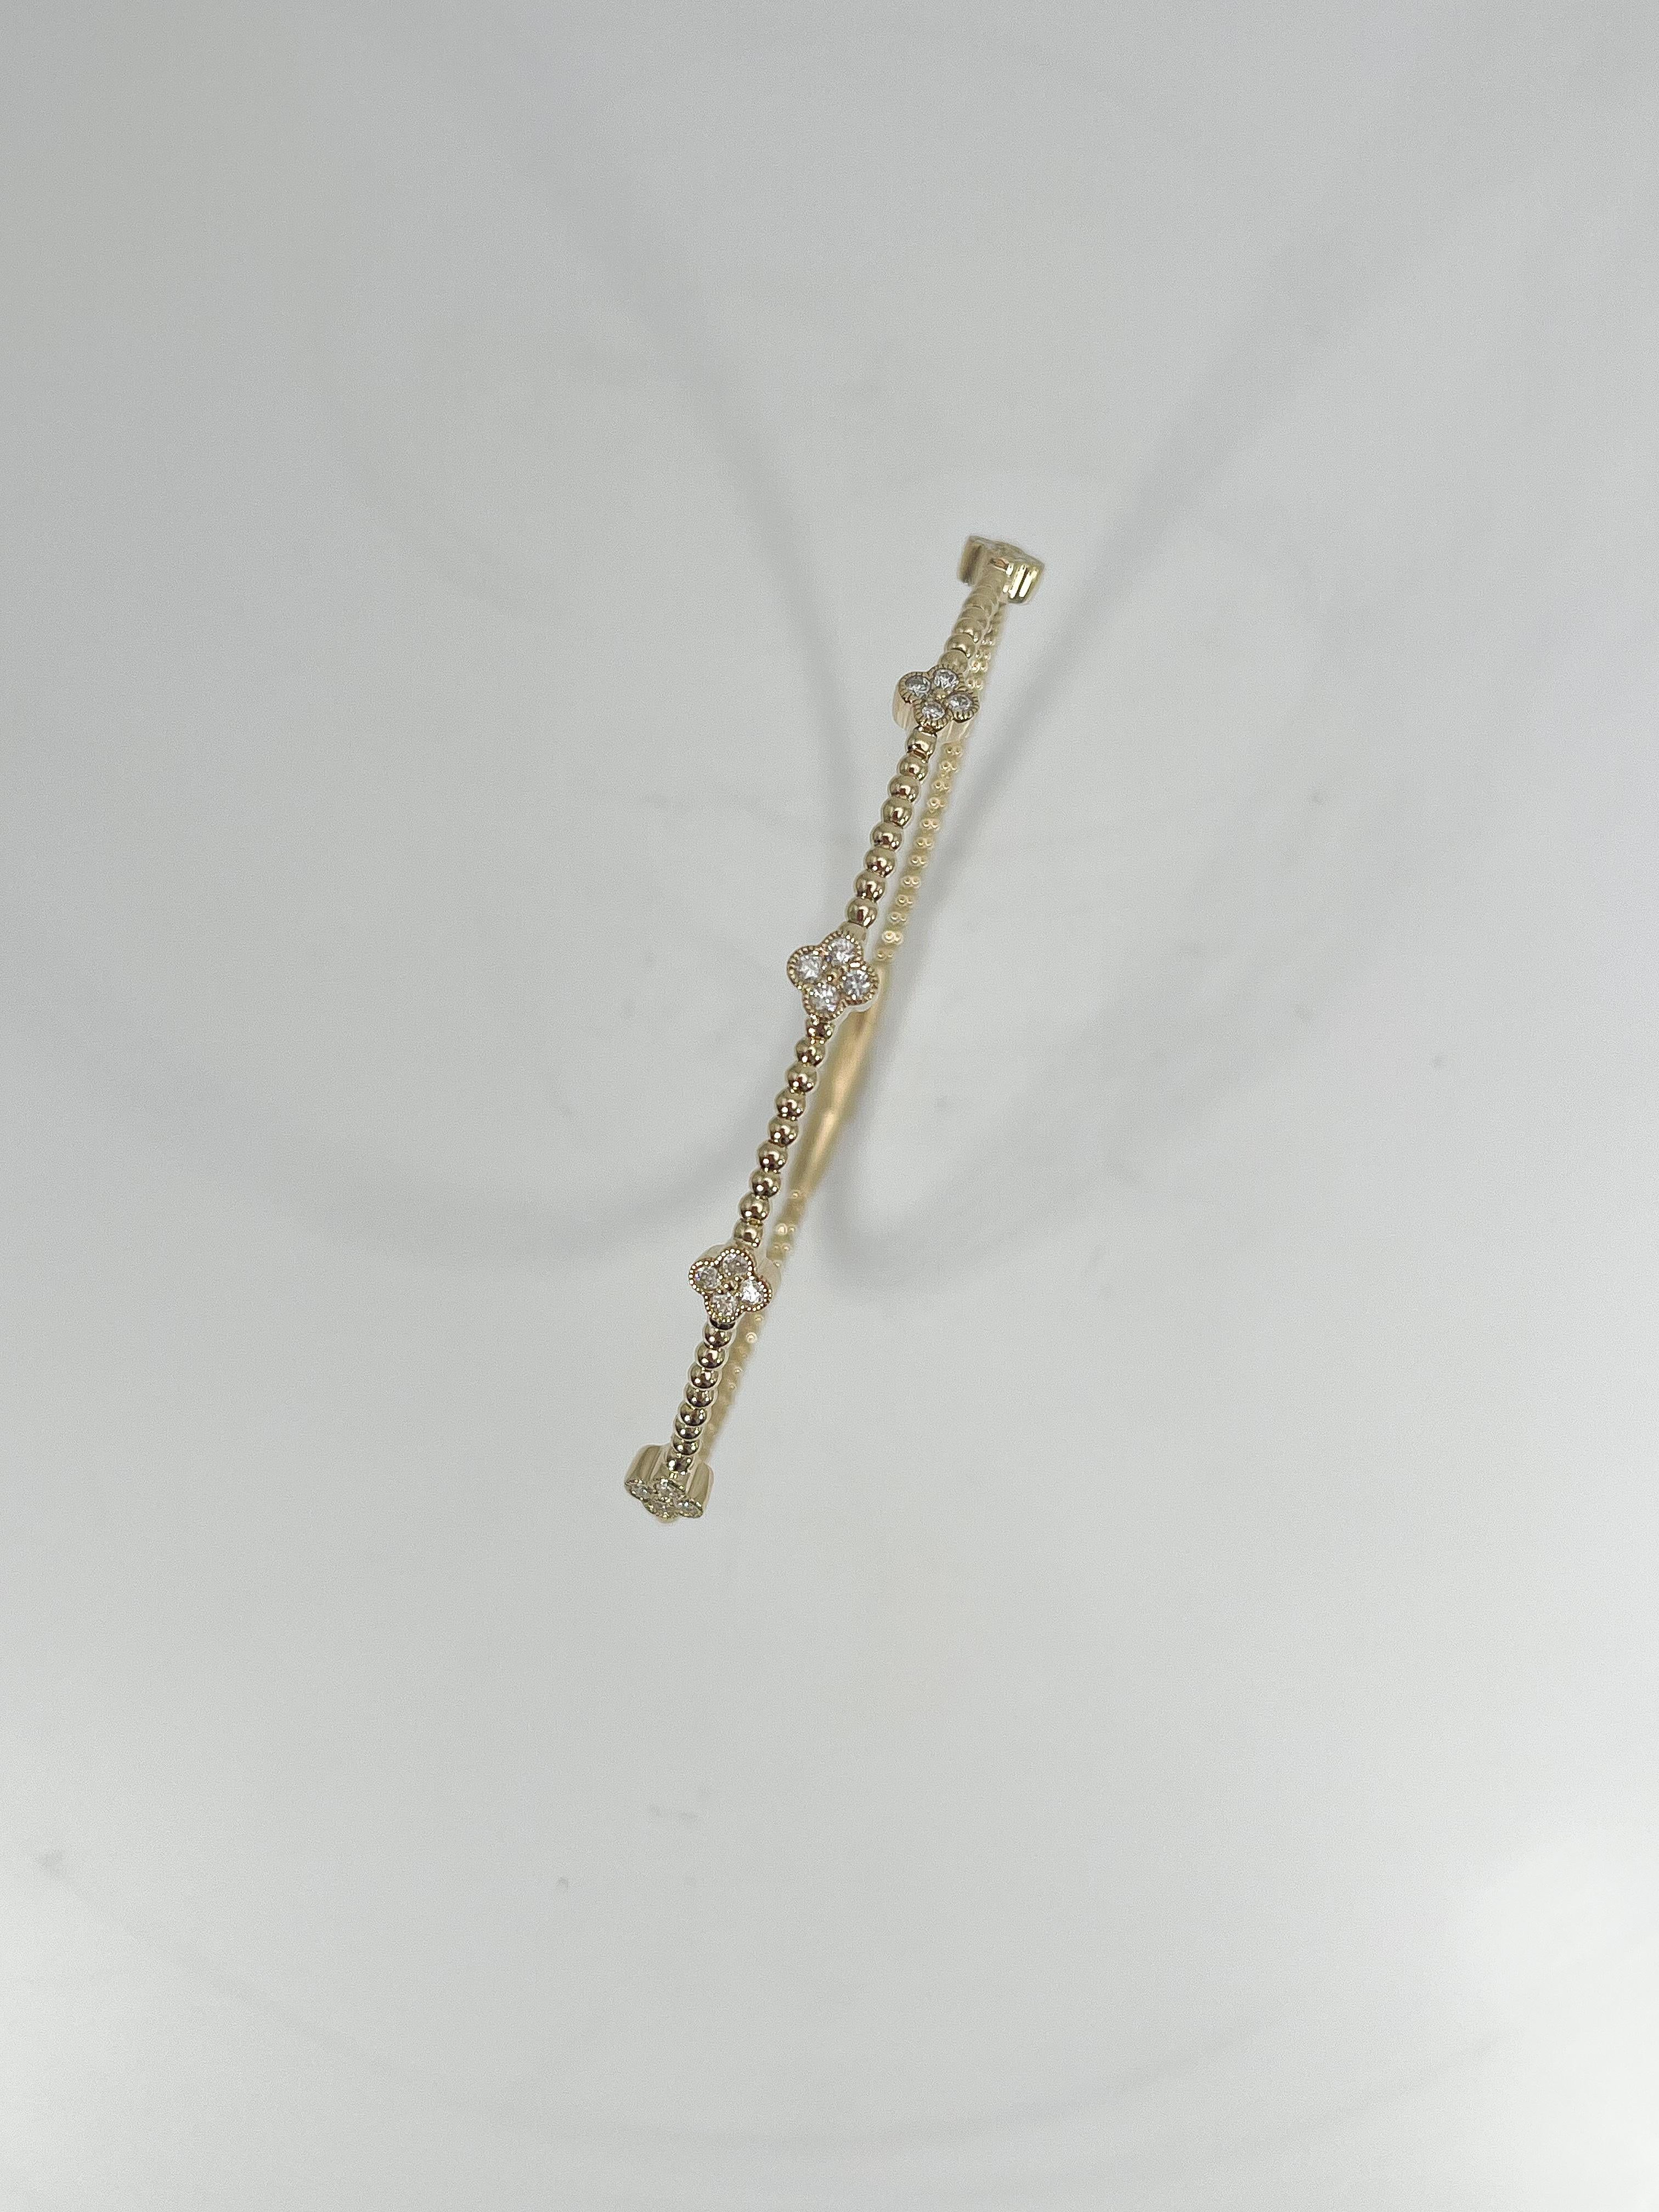 14k yellow gold .35 CTW diamond cluster flex bangle. The stones in this bracelet are all round, the width is 5 mm, the inside diameter is about 4 inches, and it has a total weight of 5.35 grams.